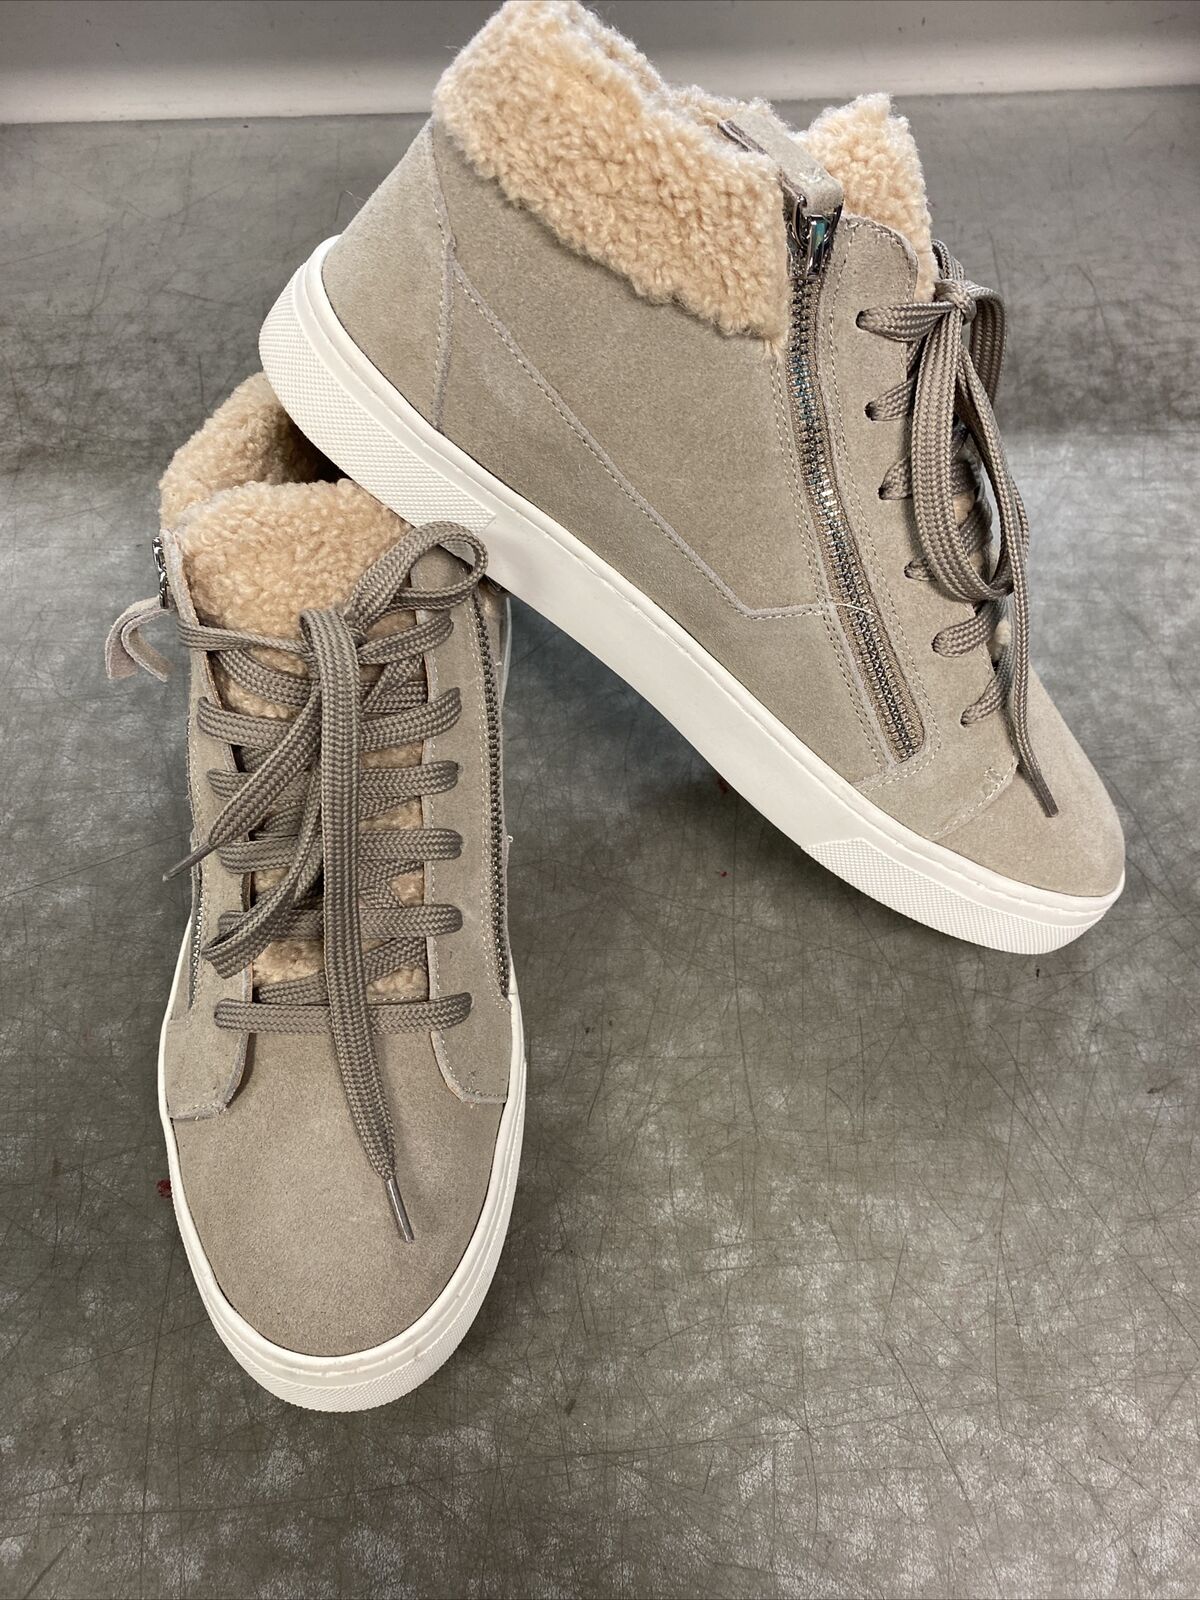 Steve Madden Kameo Taupe Suede Faux-Fur Lined Sneakers Size 10 - beyond